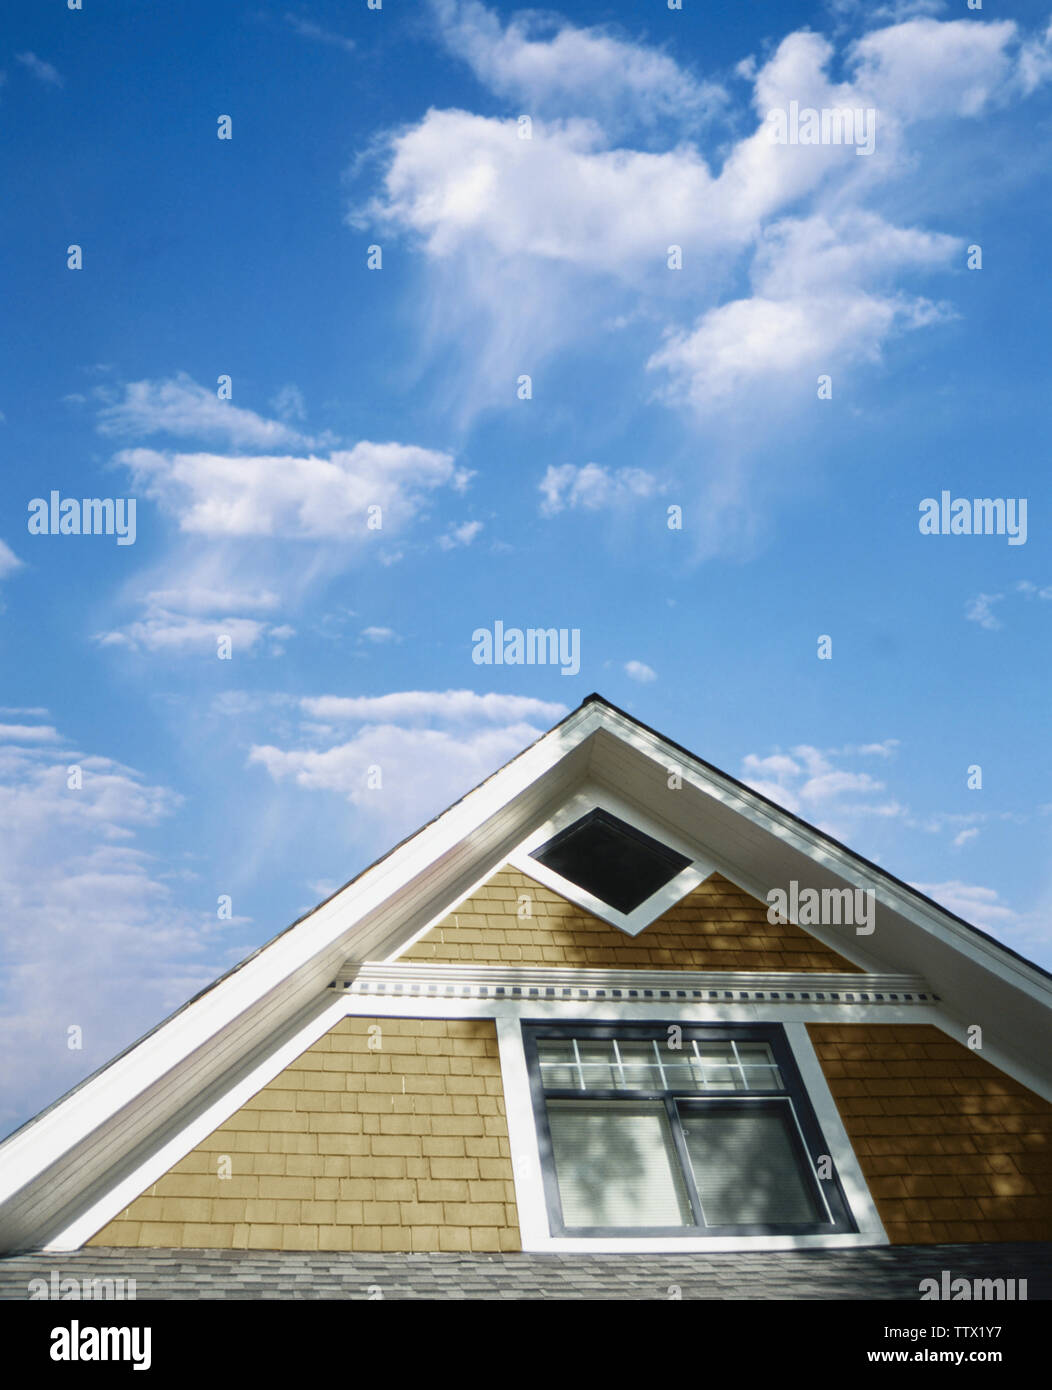 High section view of a house Stock Photo